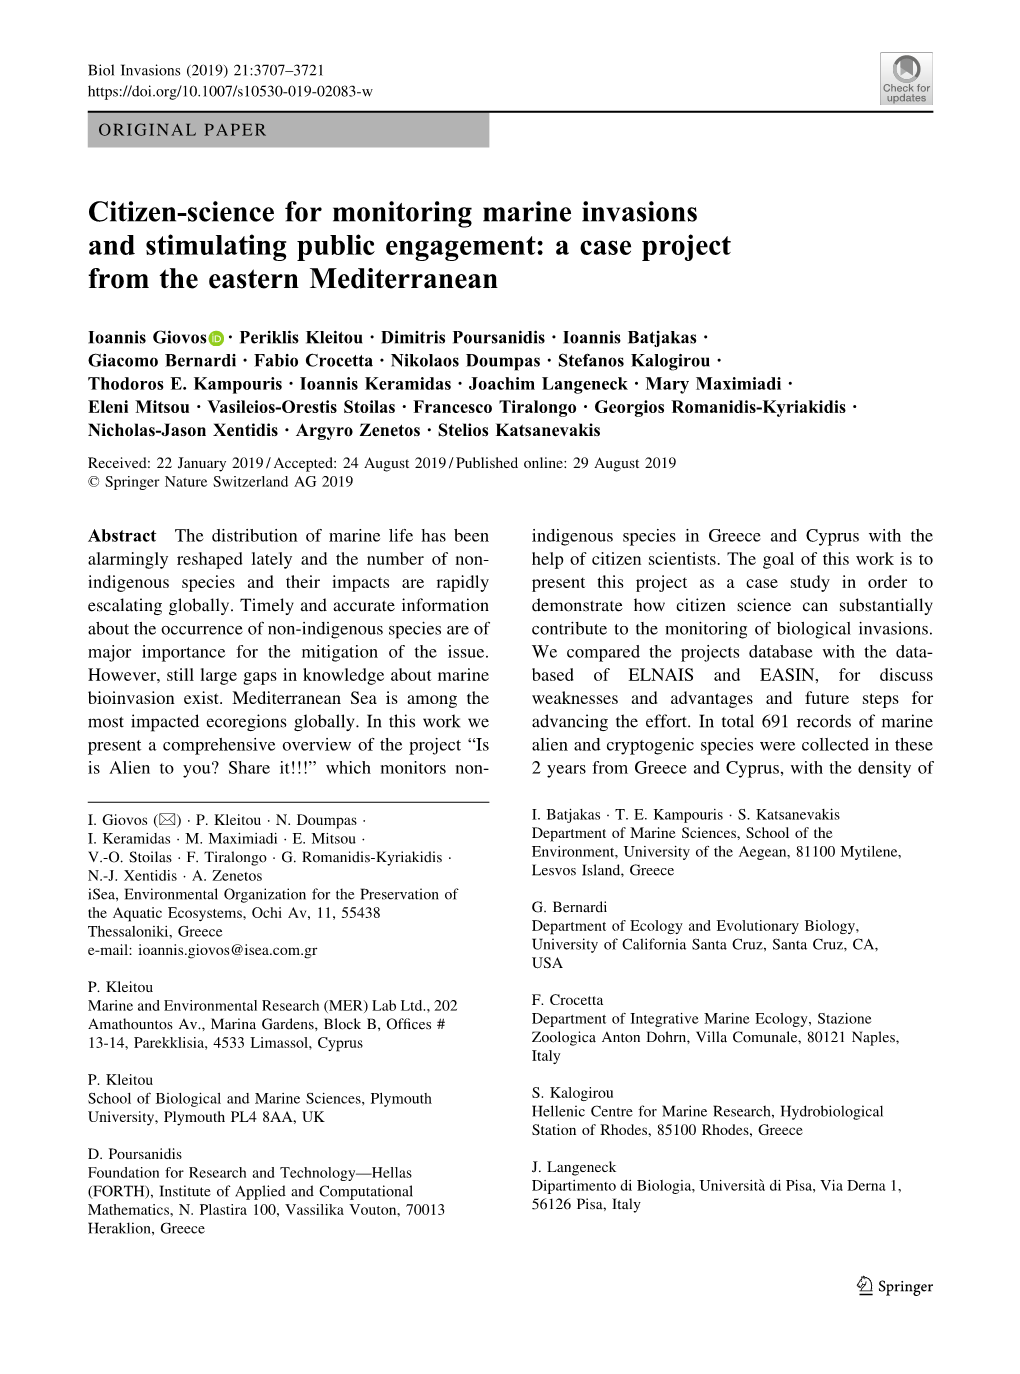 Citizen-Science for Monitoring Marine Invasions and Stimulating Public Engagement: a Case Project from the Eastern Mediterranean